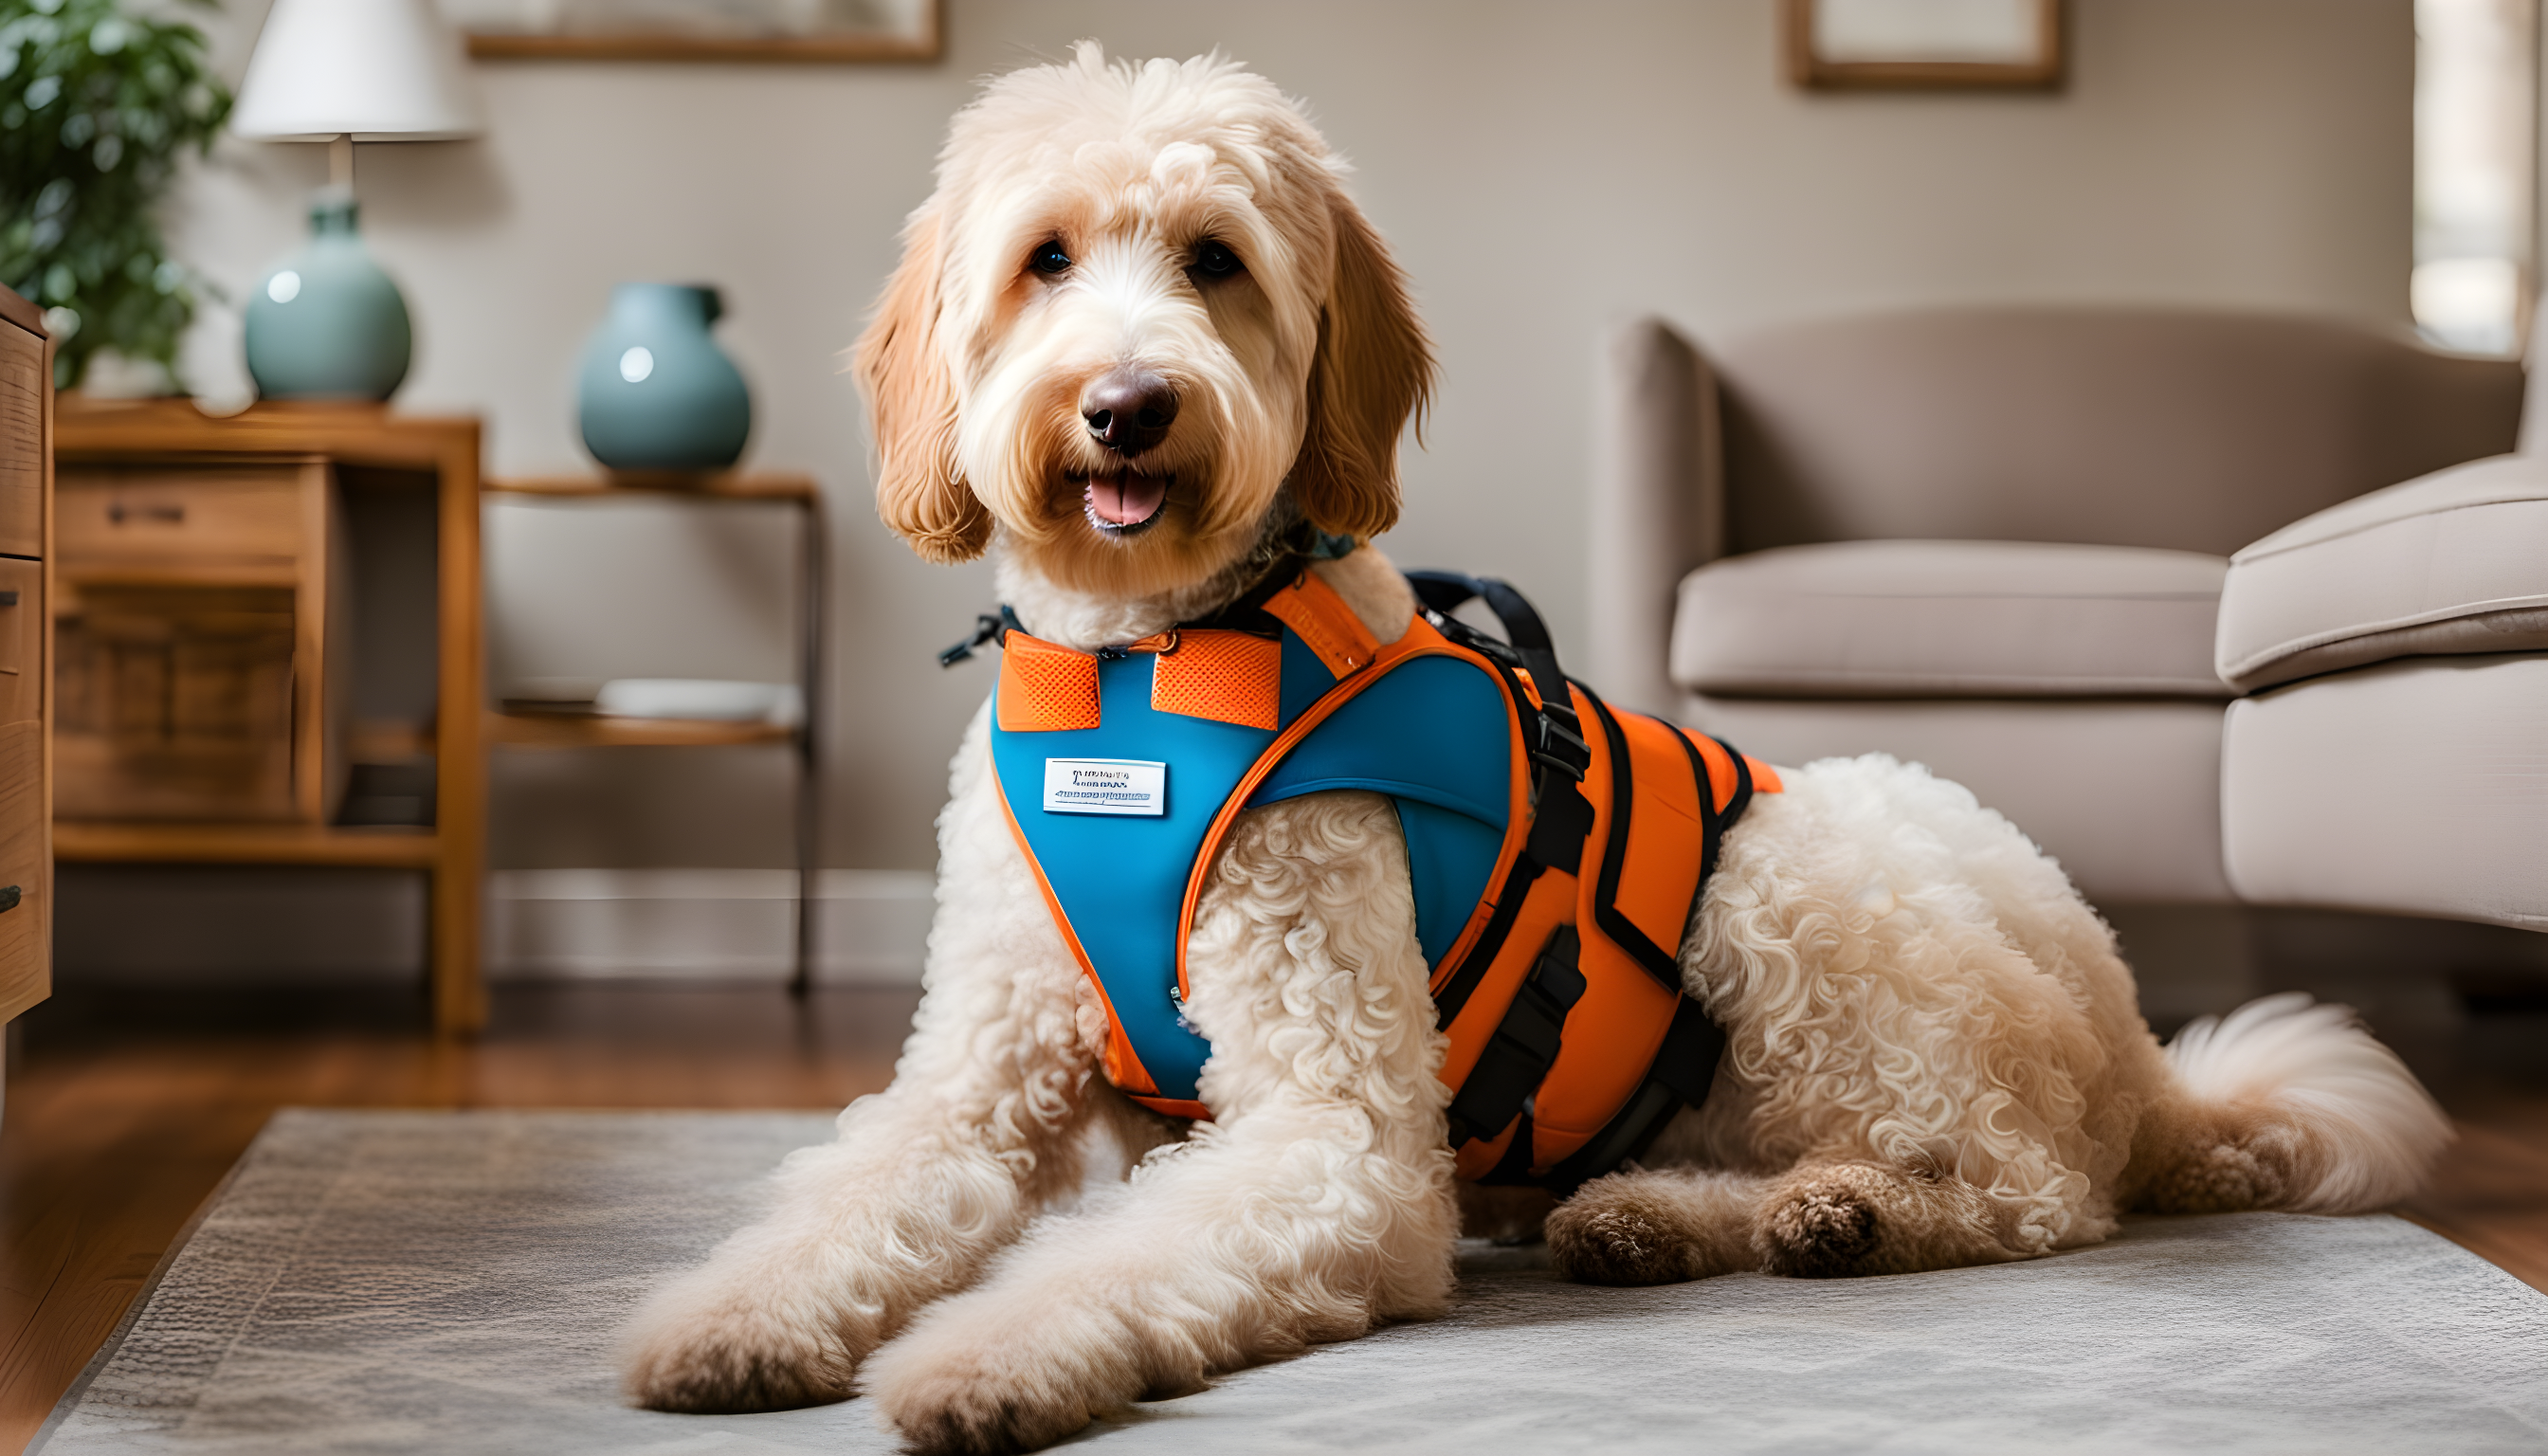 A Labradoodle wearing a service dog vest, sitting obediently next to a variety of allergy-friendly household items